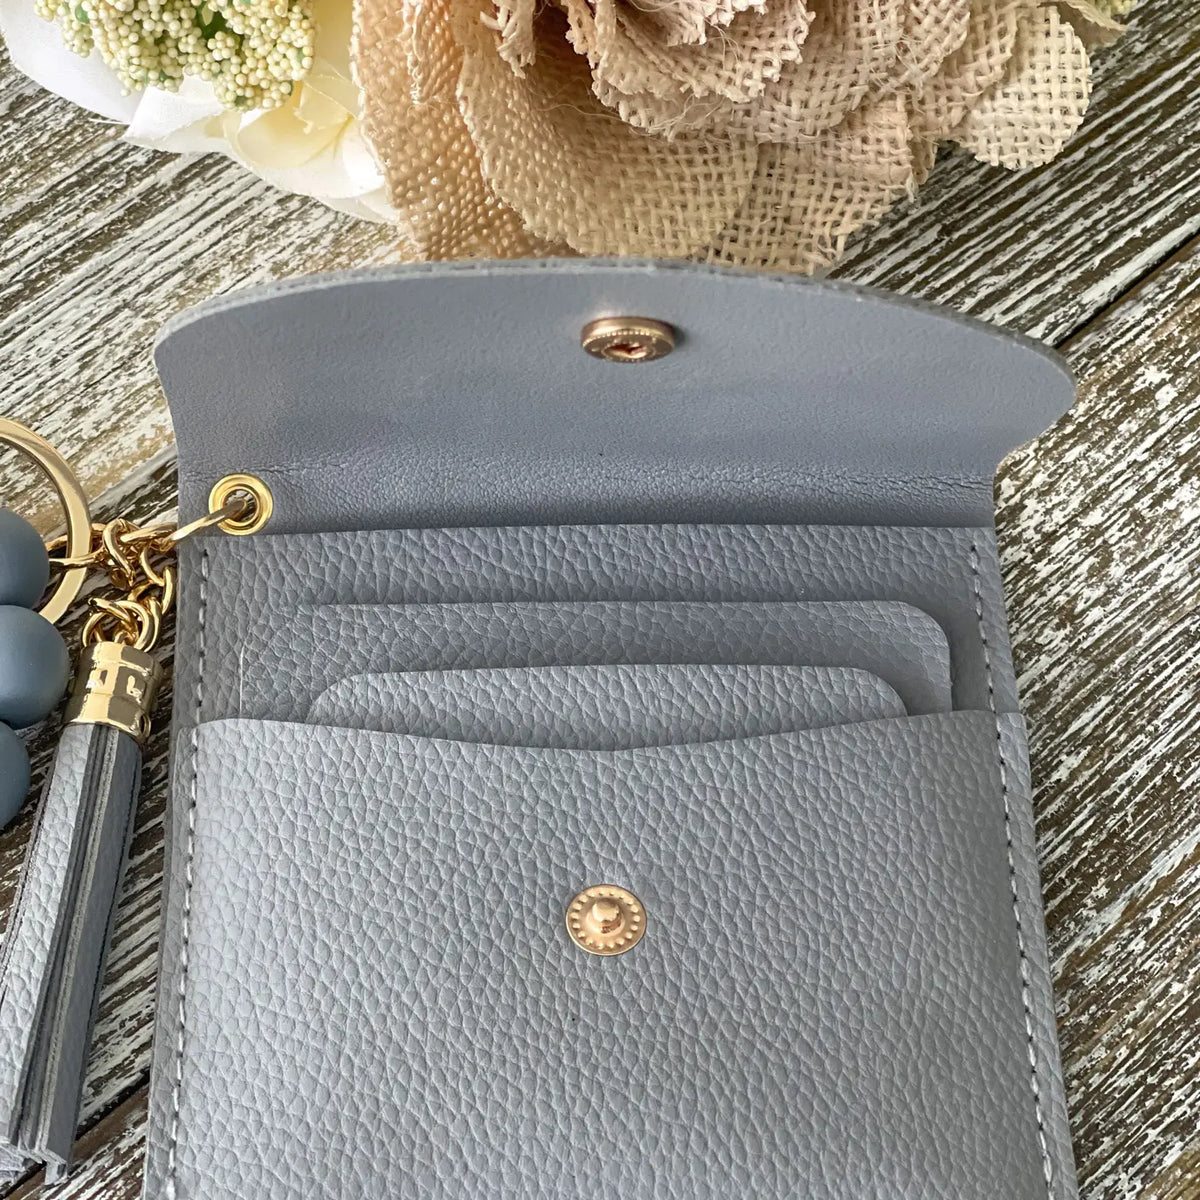 Snap Closure Wallet with Keychain